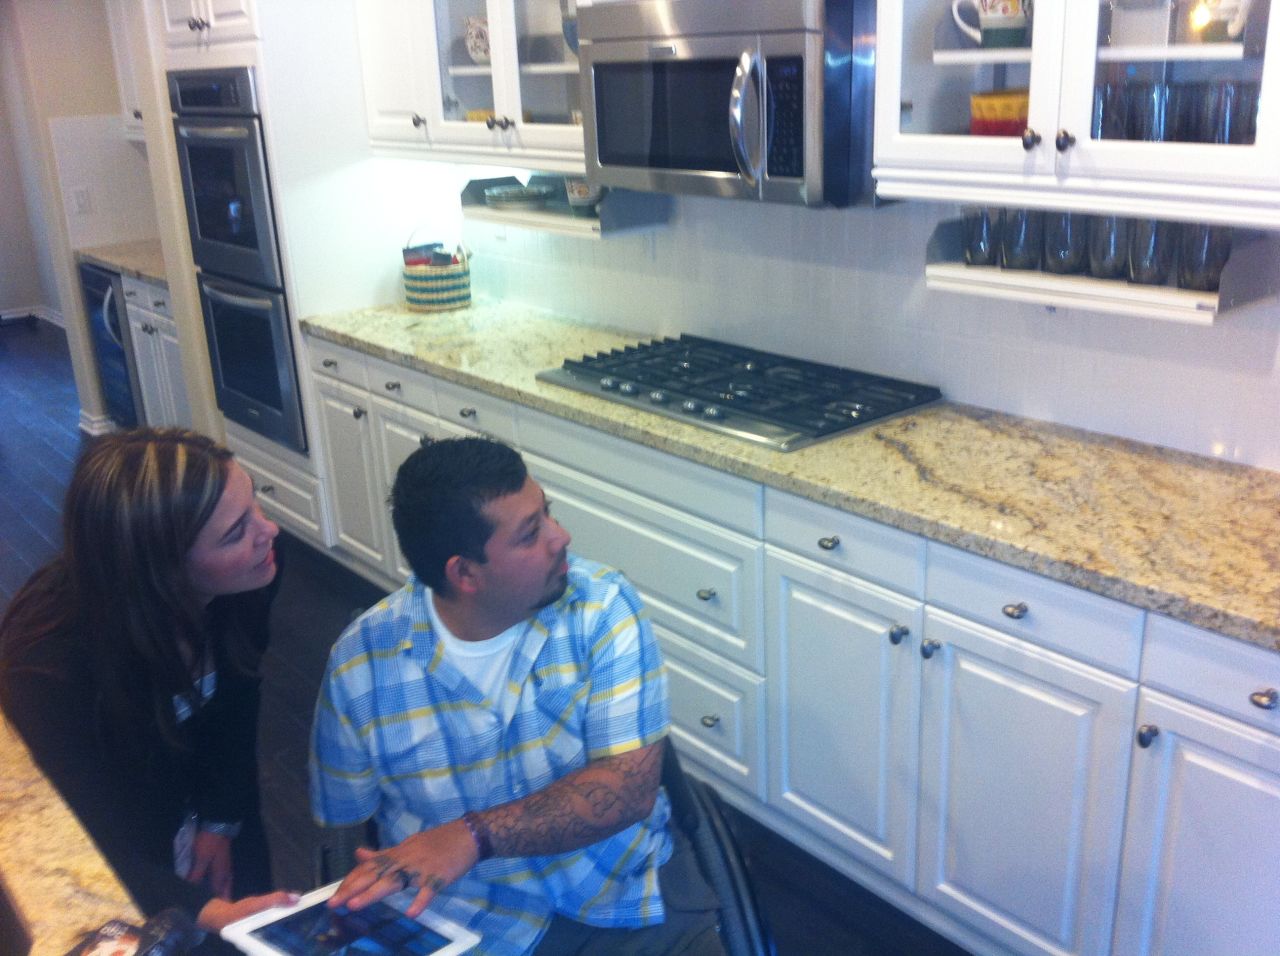 Dominguez explores the automated kitchen in his new 'smart' home with Danielle Tocco of Standard Pacific Homes. The home is controlled by an iPad, with which Dominguez can move cabinets and access the security system and air conditioning.